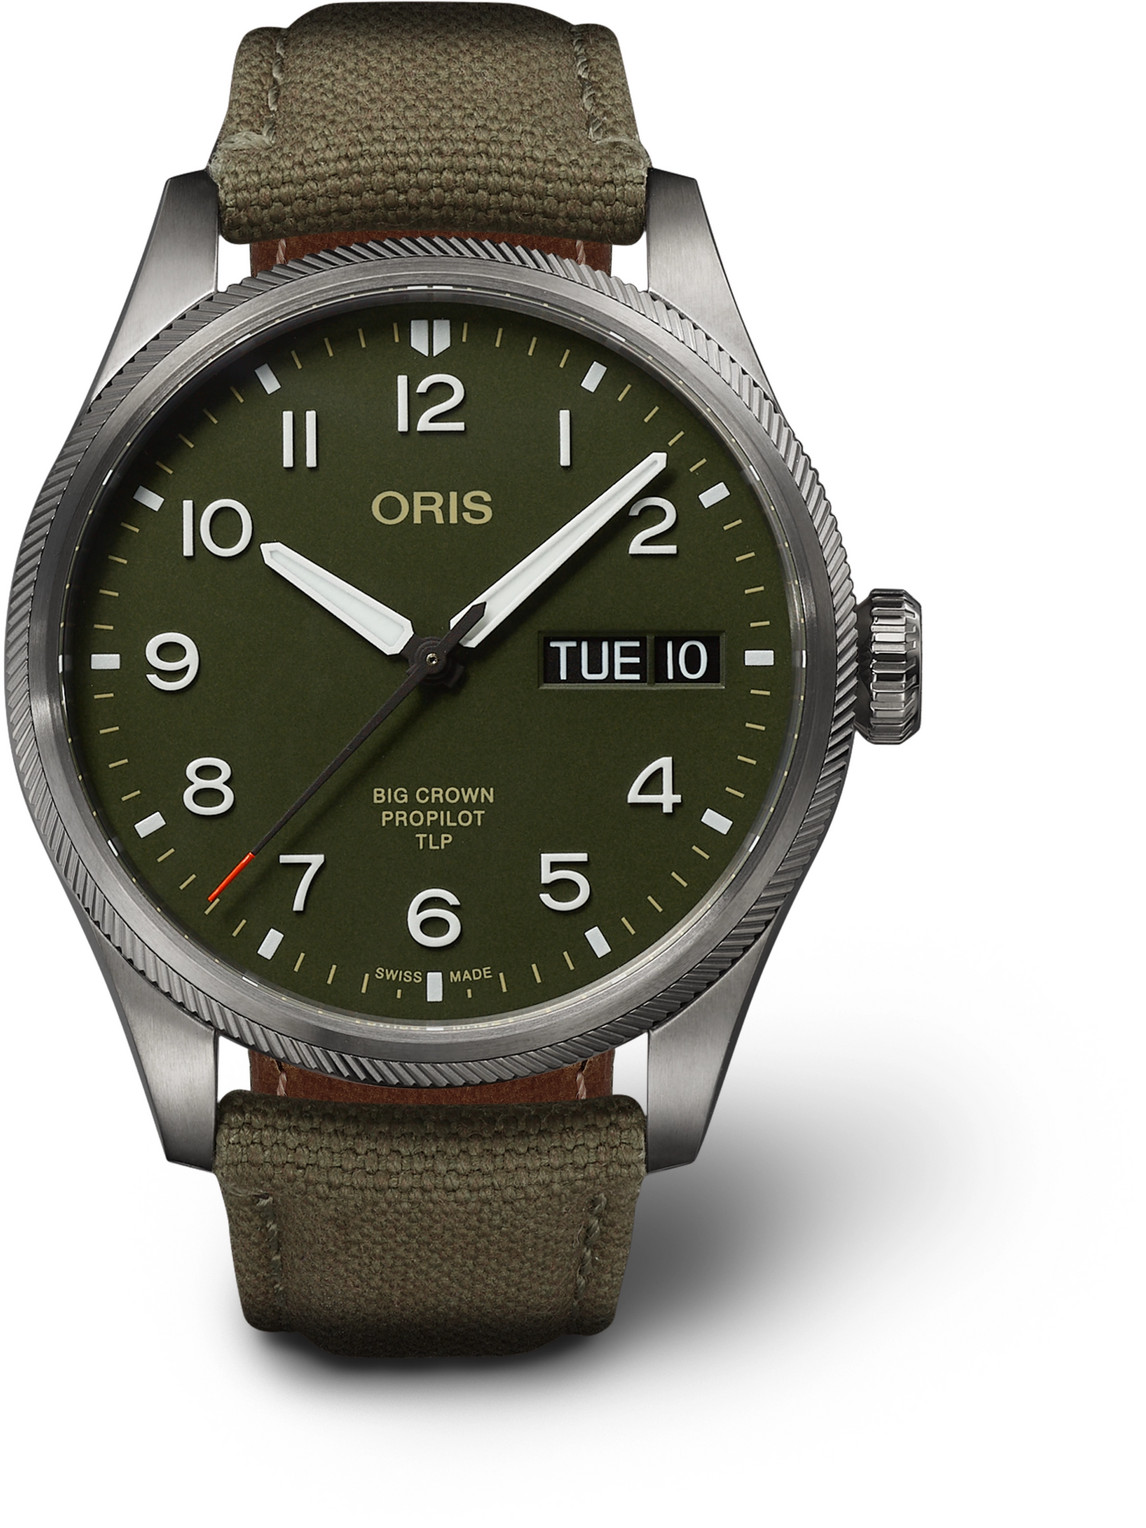 Oris Tlp Big Crown Propilot Limited Edition Automatic 44mm Stainless Steel And Canvas Watch, Ref. No. 01 In Green